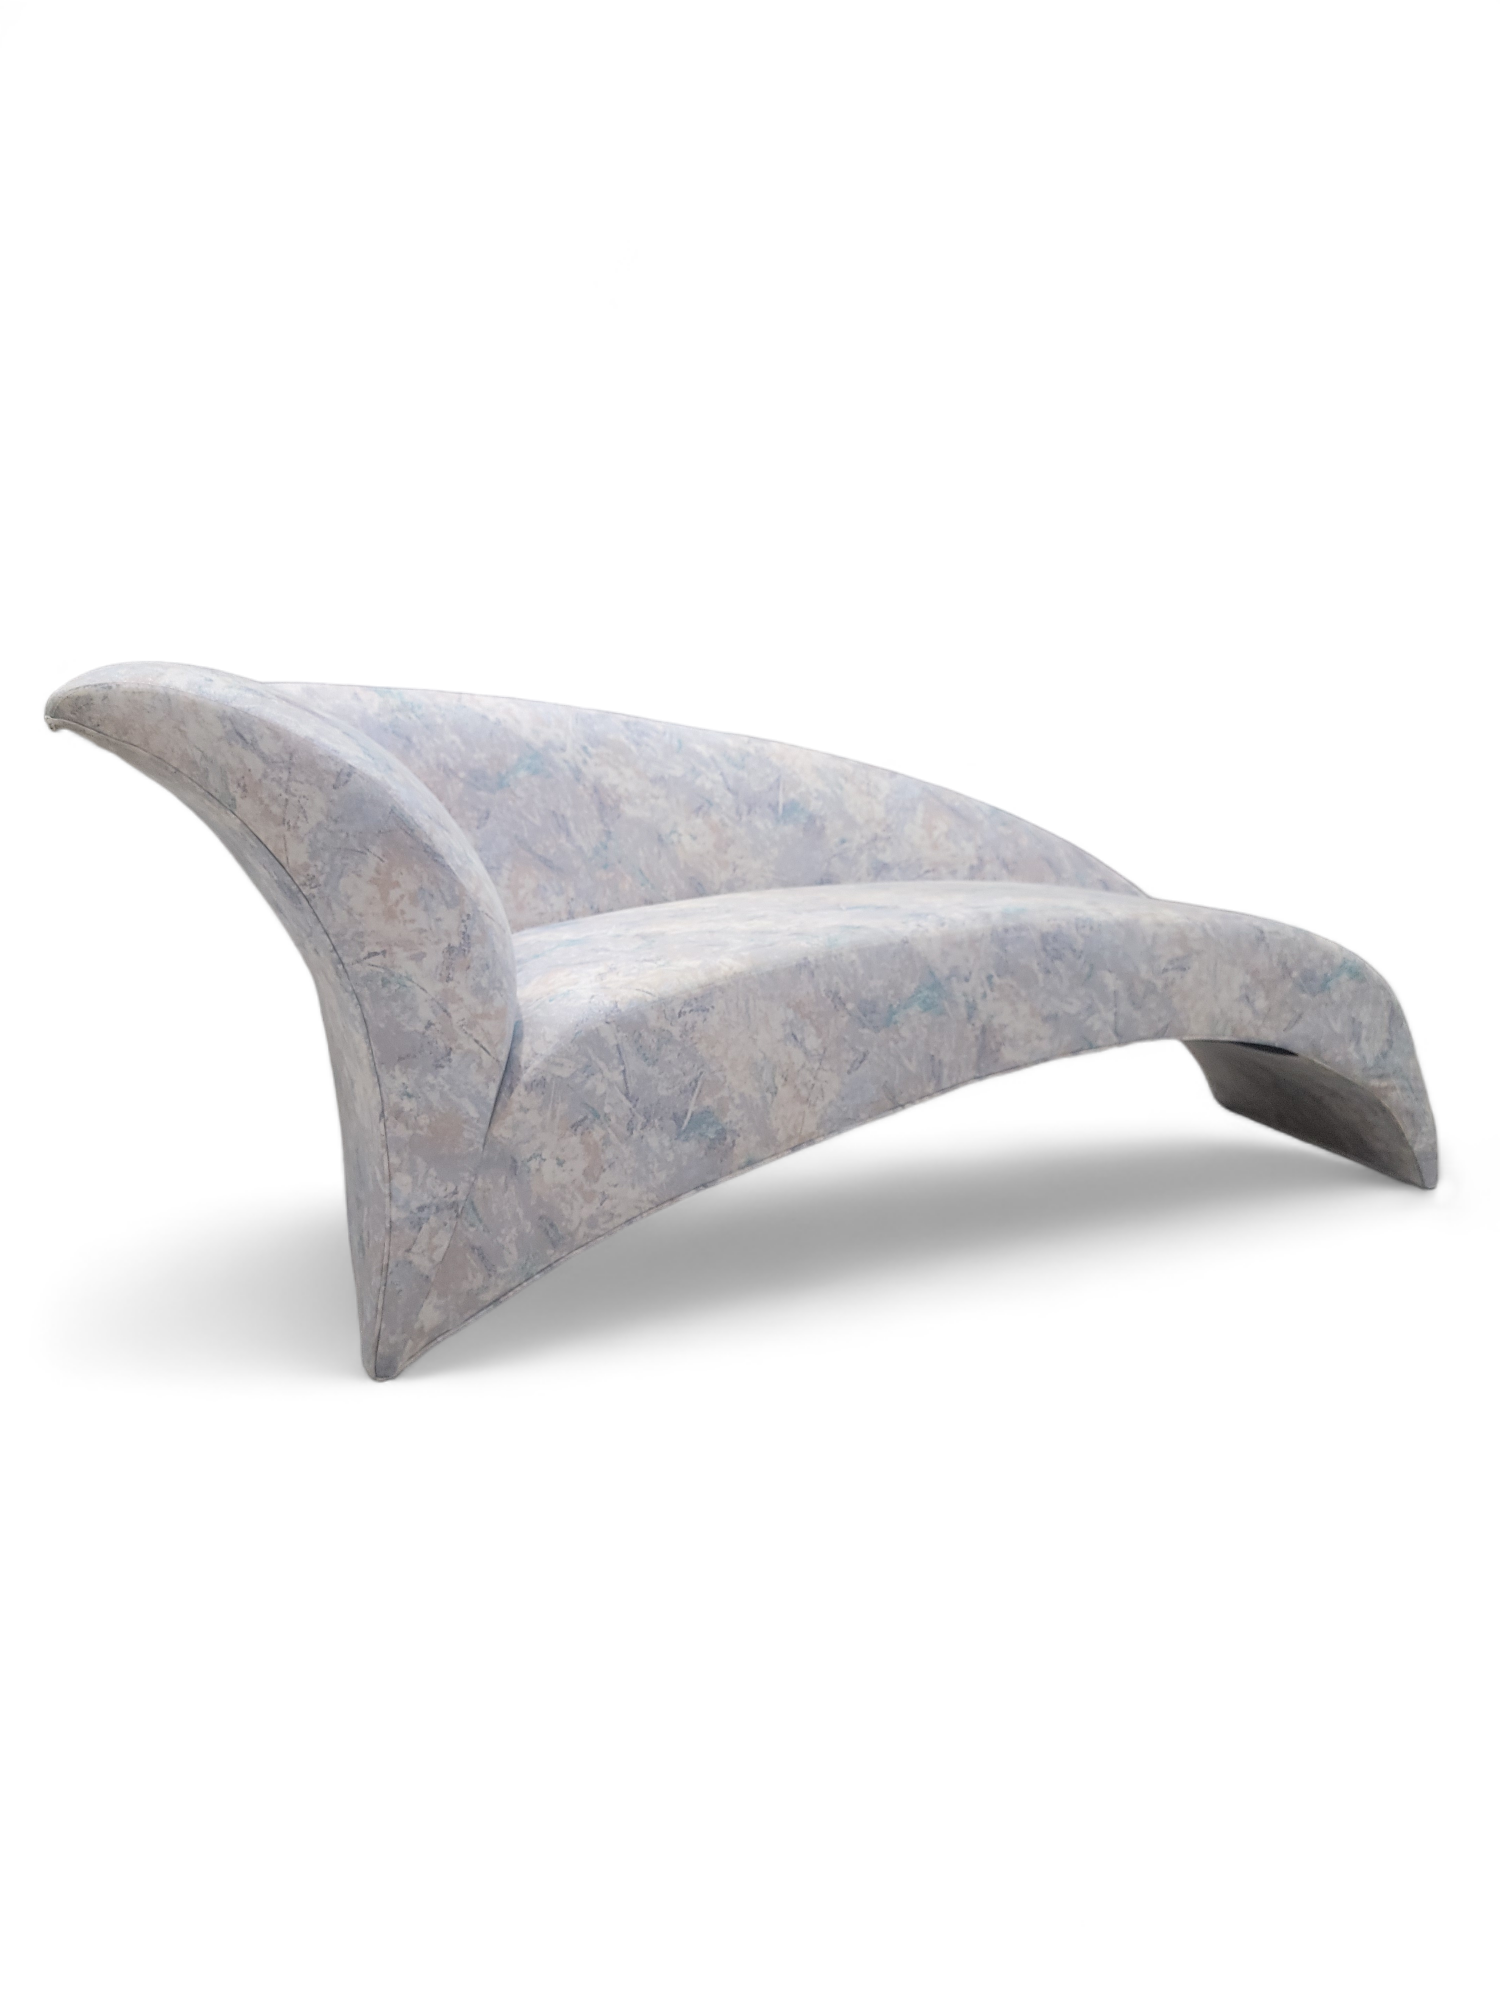 NEW - Vladimir Kagan Postmodern Marilyn Sculptural Chaise Lounge For Directional